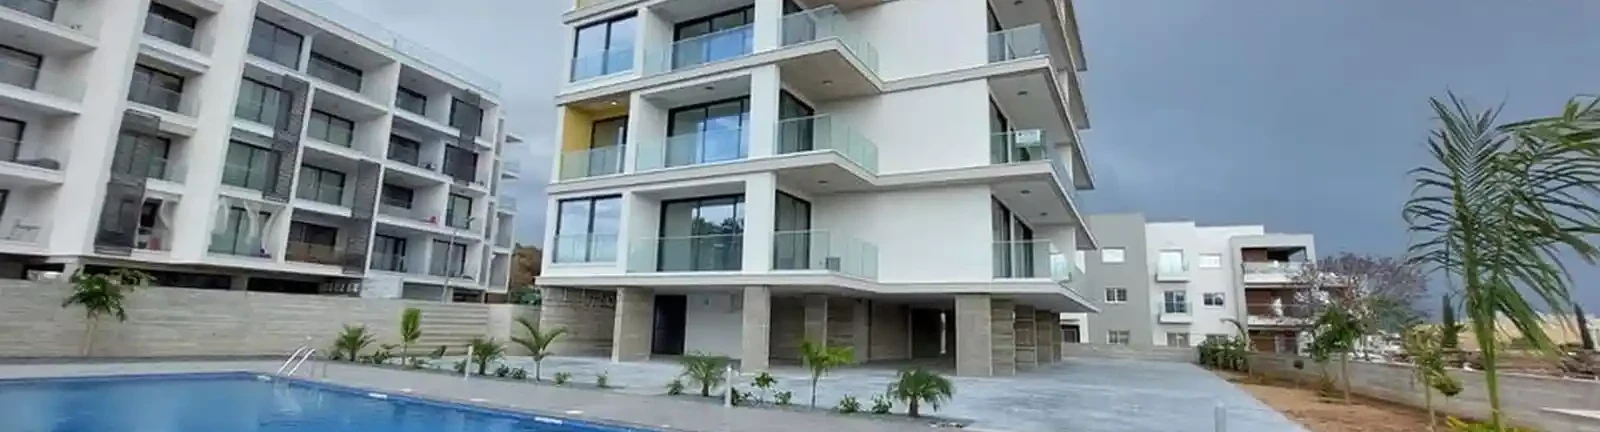 3-bedroom apartment to rent €2.400, image 1